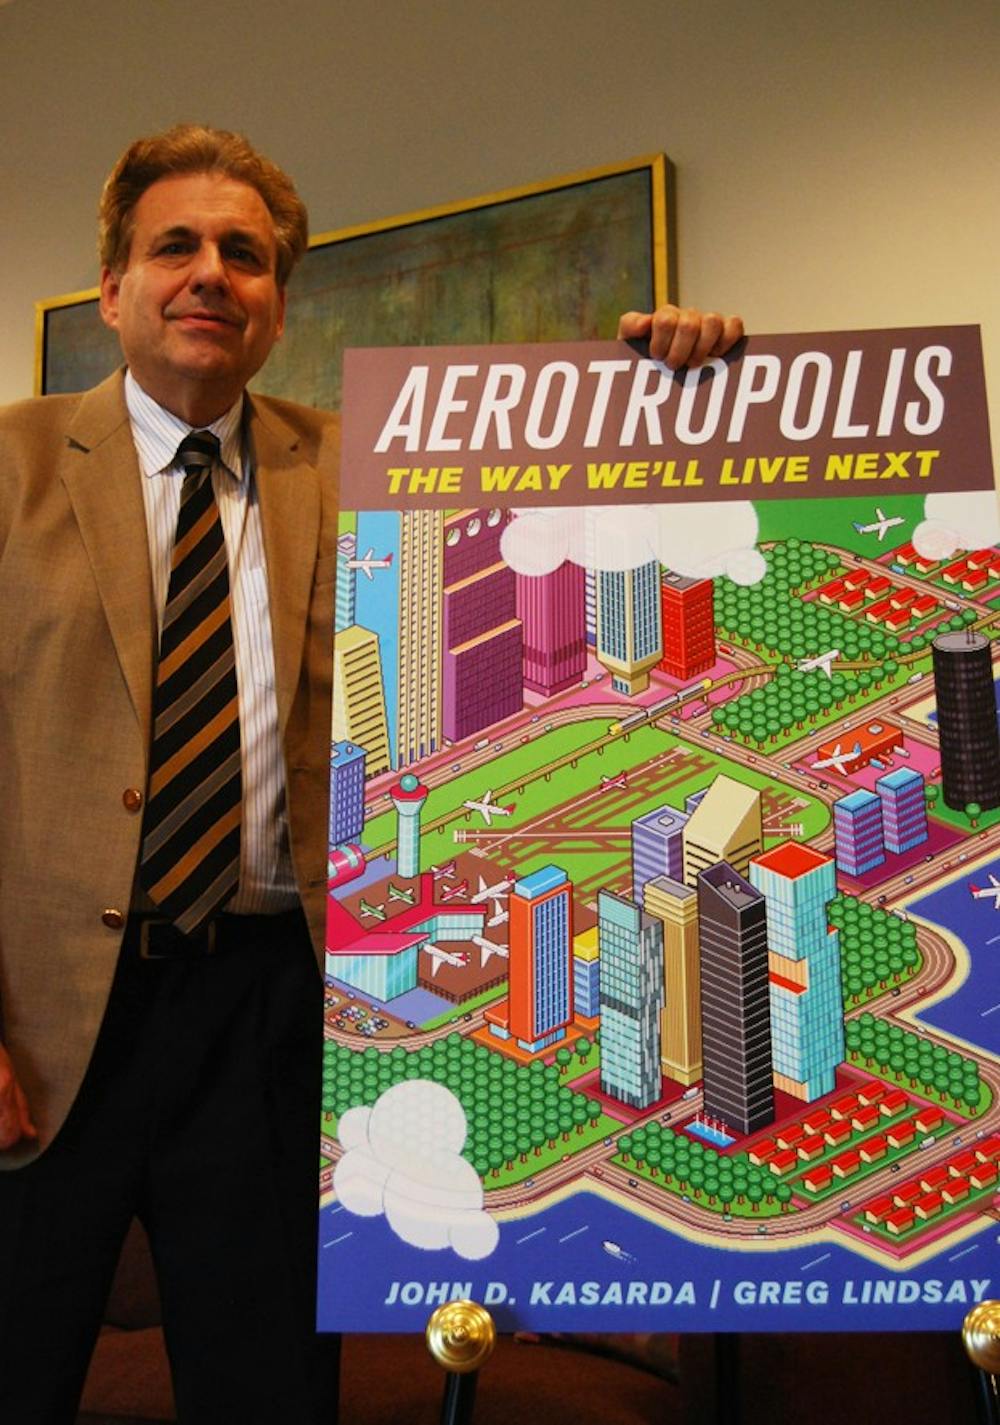 Dr. John D. Kasarda, author of "Aerotropolis" and Director of the Kenan Institute of Private Enterprise, has published more than 100 articles and nine books on airport cities, aviation infrastructure, and economic development. He coined the term 'aerotropolis,' which stresses placing airports in the center with cities growing around them. Recently, he was cited in Times Magazine's article on '10 Ideas that will Change the World.' 